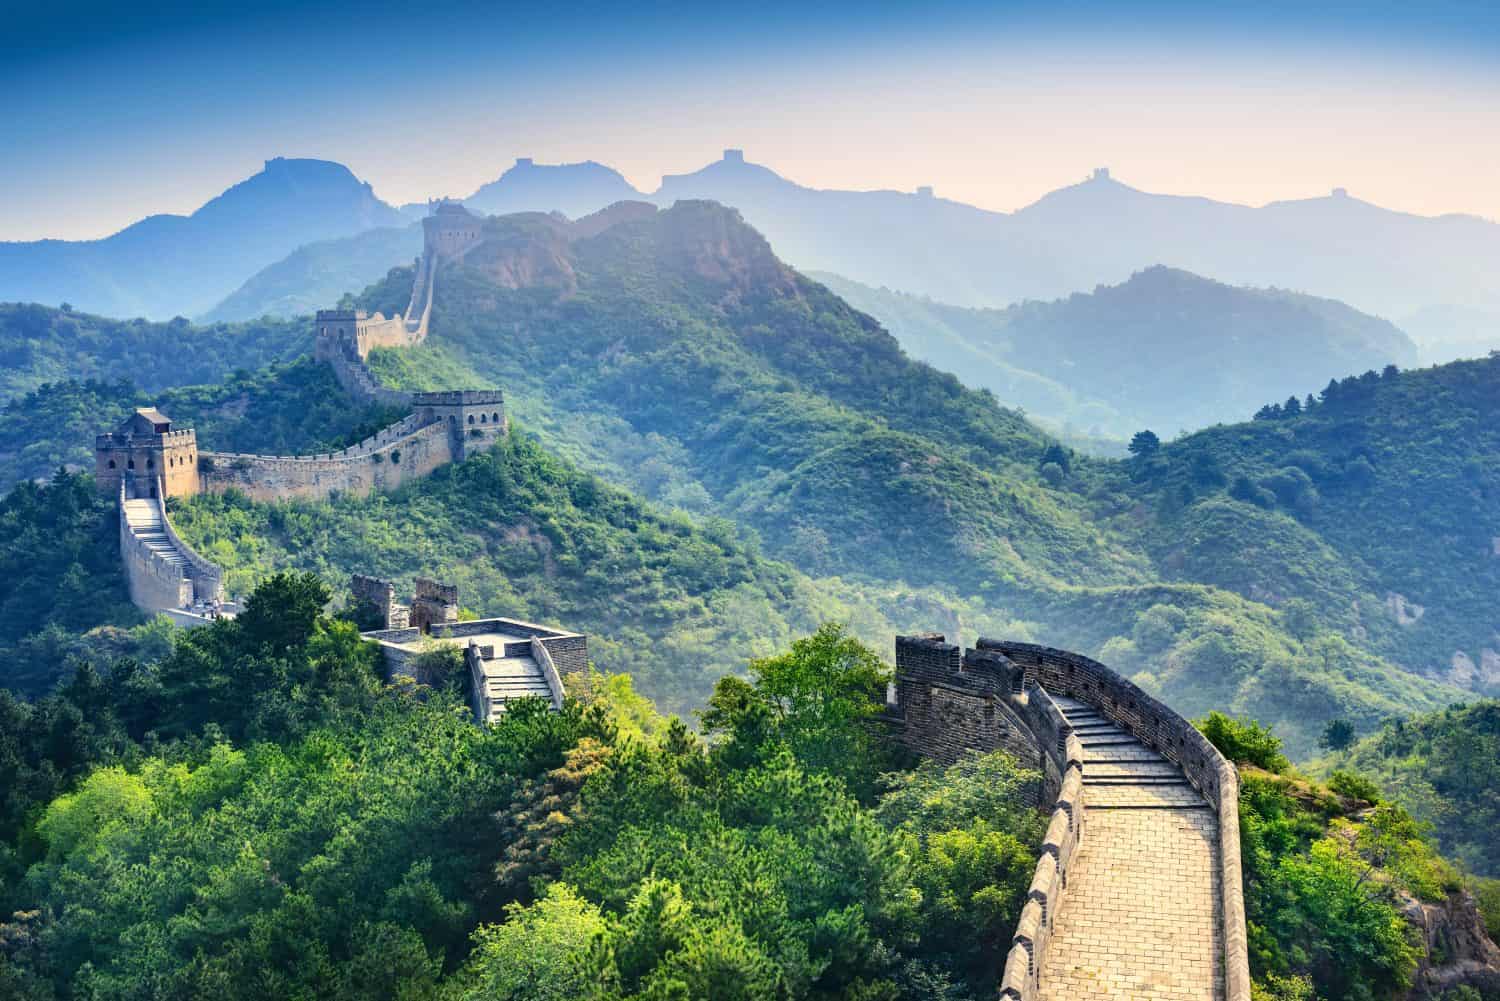 <ul> <li><strong>Location:</strong> China</li> <li><strong>Known For:</strong> Being one of the world's seven wonders, its large size and architecture</li> </ul> <p>The Great Wall of China is one of the world's seven wonders. Between its rich history and wonder, it attracts millions of tourists a year. It is the world's largest fortification, measuring just over <a href="https://www.history.com/topics/ancient-china/great-wall-of-china">13,000 miles</a> in length. However, over <a href="https://www.npr.org/sections/parallels/2016/01/27/464421353/chinas-great-wall-is-crumbling-in-many-places-can-it-be-saved#:~:text=Wall%20of%20China.-,Roughly%20a%20third%20of%20the%20wall%27s%2012%2C000%20miles%20have%20crumbled,greatest%20challenge%20in%20cultural%20preservation.">30%</a> of the wall has crumbled completely, leaving only dust in its wake, and around <a href="https://www.npr.org/sections/parallels/2016/01/27/464421353/chinas-great-wall-is-crumbling-in-many-places-can-it-be-saved">10%</a> is exceptionally preserved. Natural erosion, tourists, and modern constructions contribute to the crumbling of the Great Wall of China.</p>